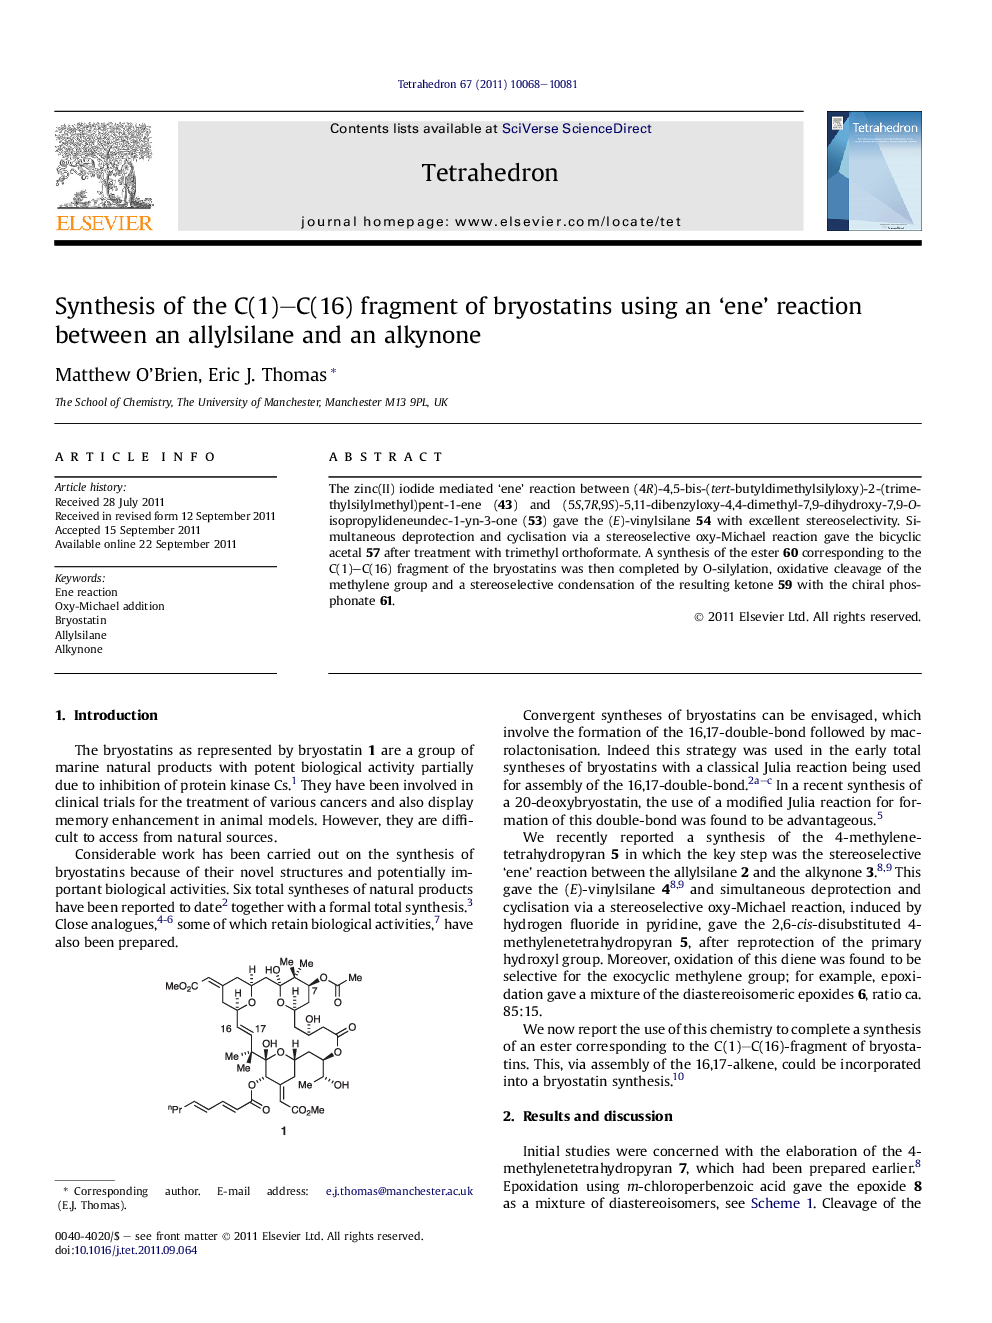 Synthesis of the C(1)-C(16) fragment of bryostatins using an 'ene' reaction between an allylsilane and an alkynone